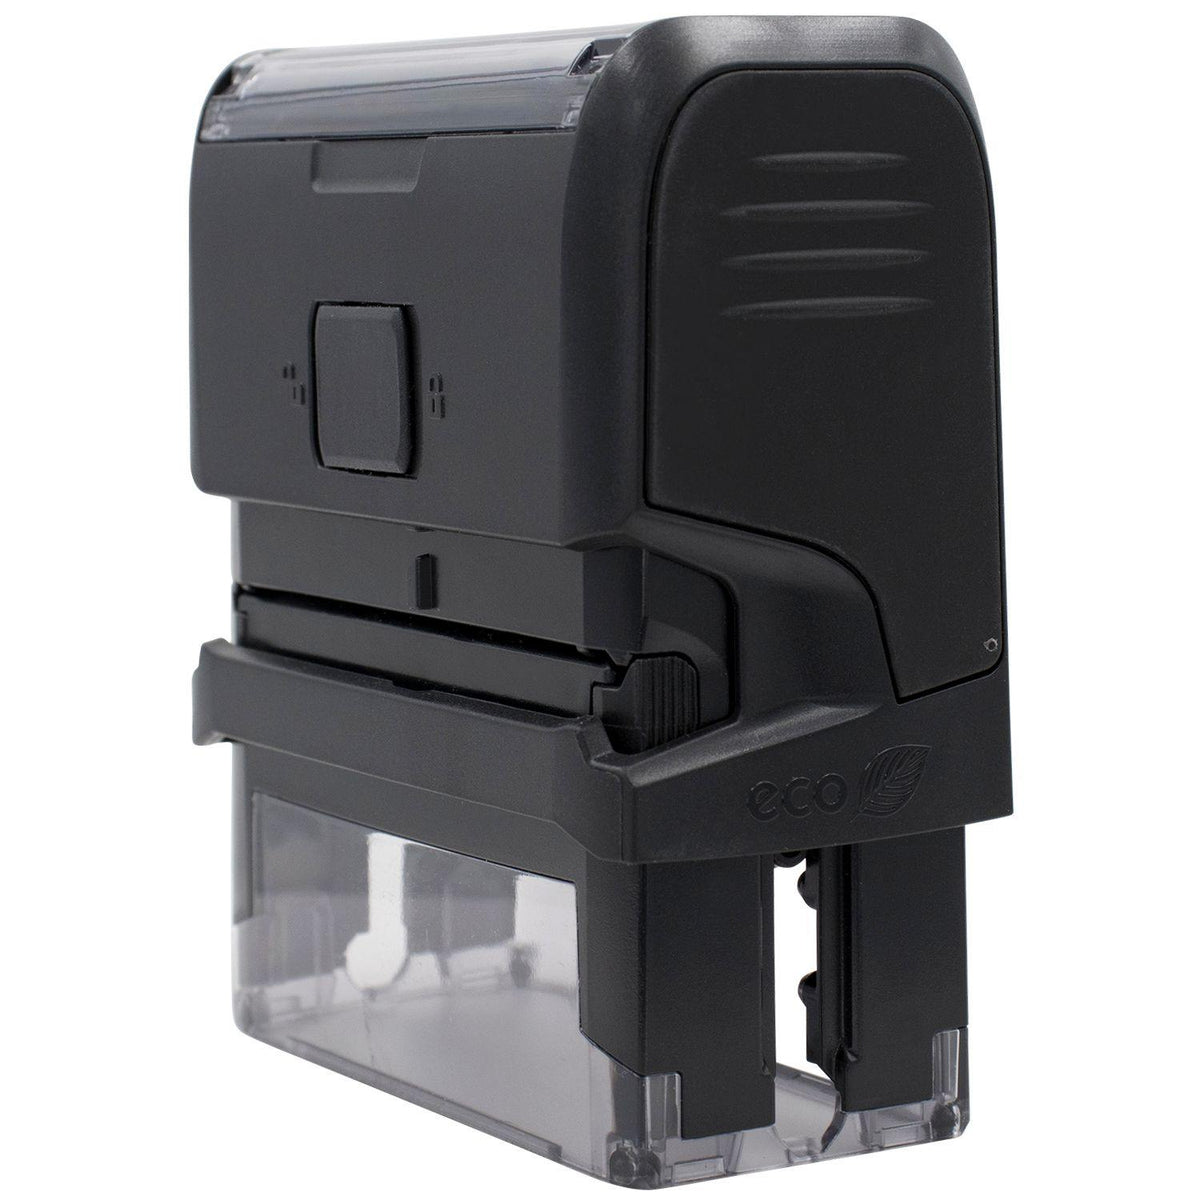 Self-Inking Void with Strikelines Stamp - Engineer Seal Stamps - Brand_Trodat, Impression Size_Small, Stamp Type_Self-Inking Stamp, Type of Use_General, Type of Use_Legal, Type of Use_Office